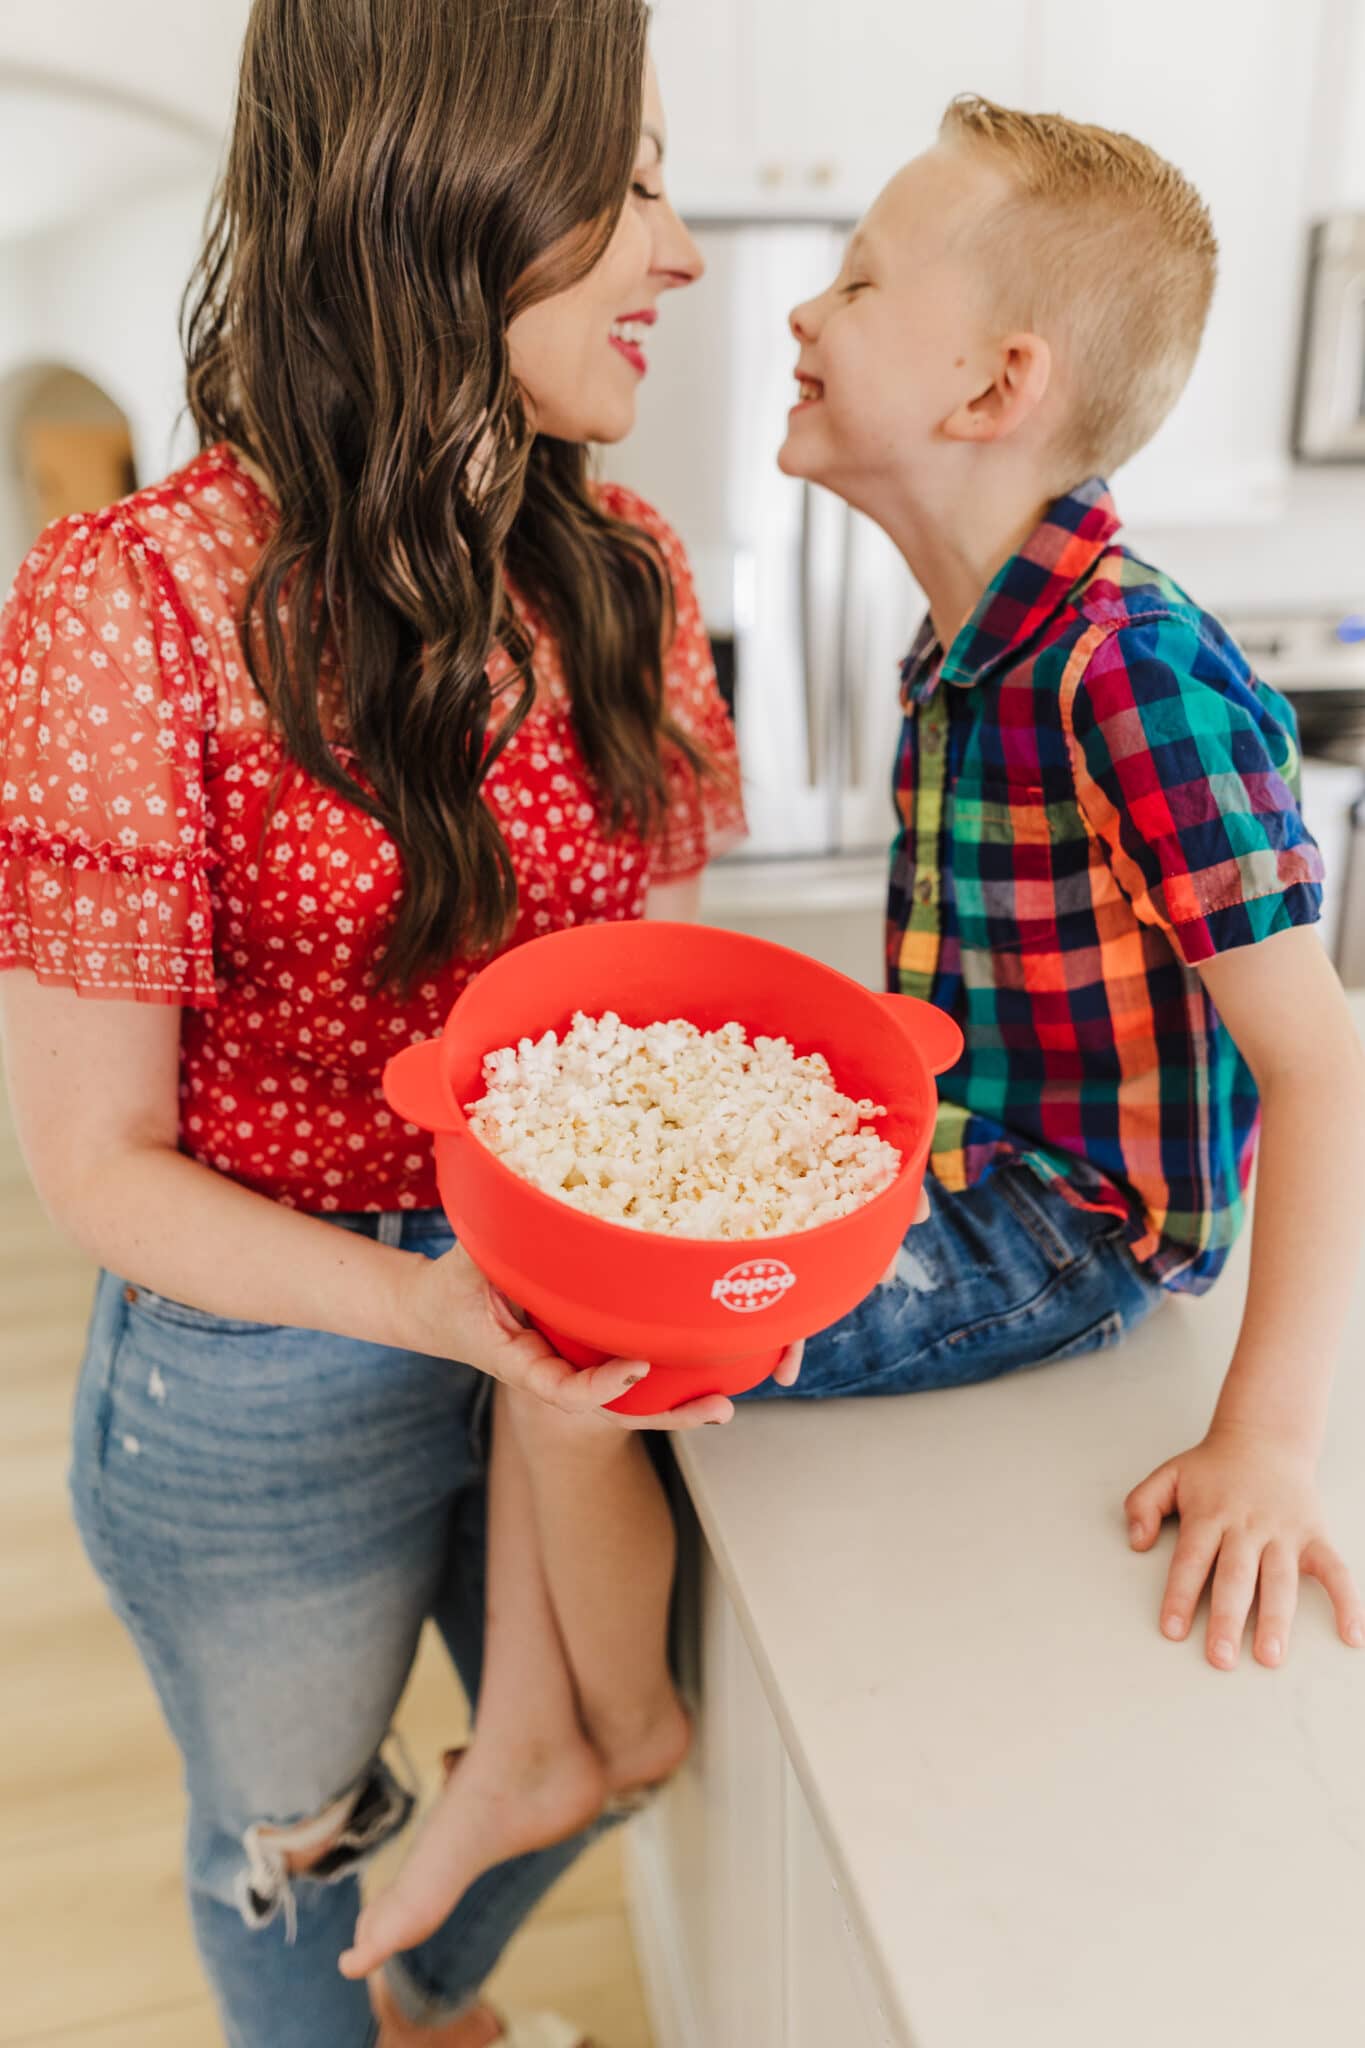 Movie Day: How to Start a Movie Day Tradition and System That Works Screen Time to Your Advantage